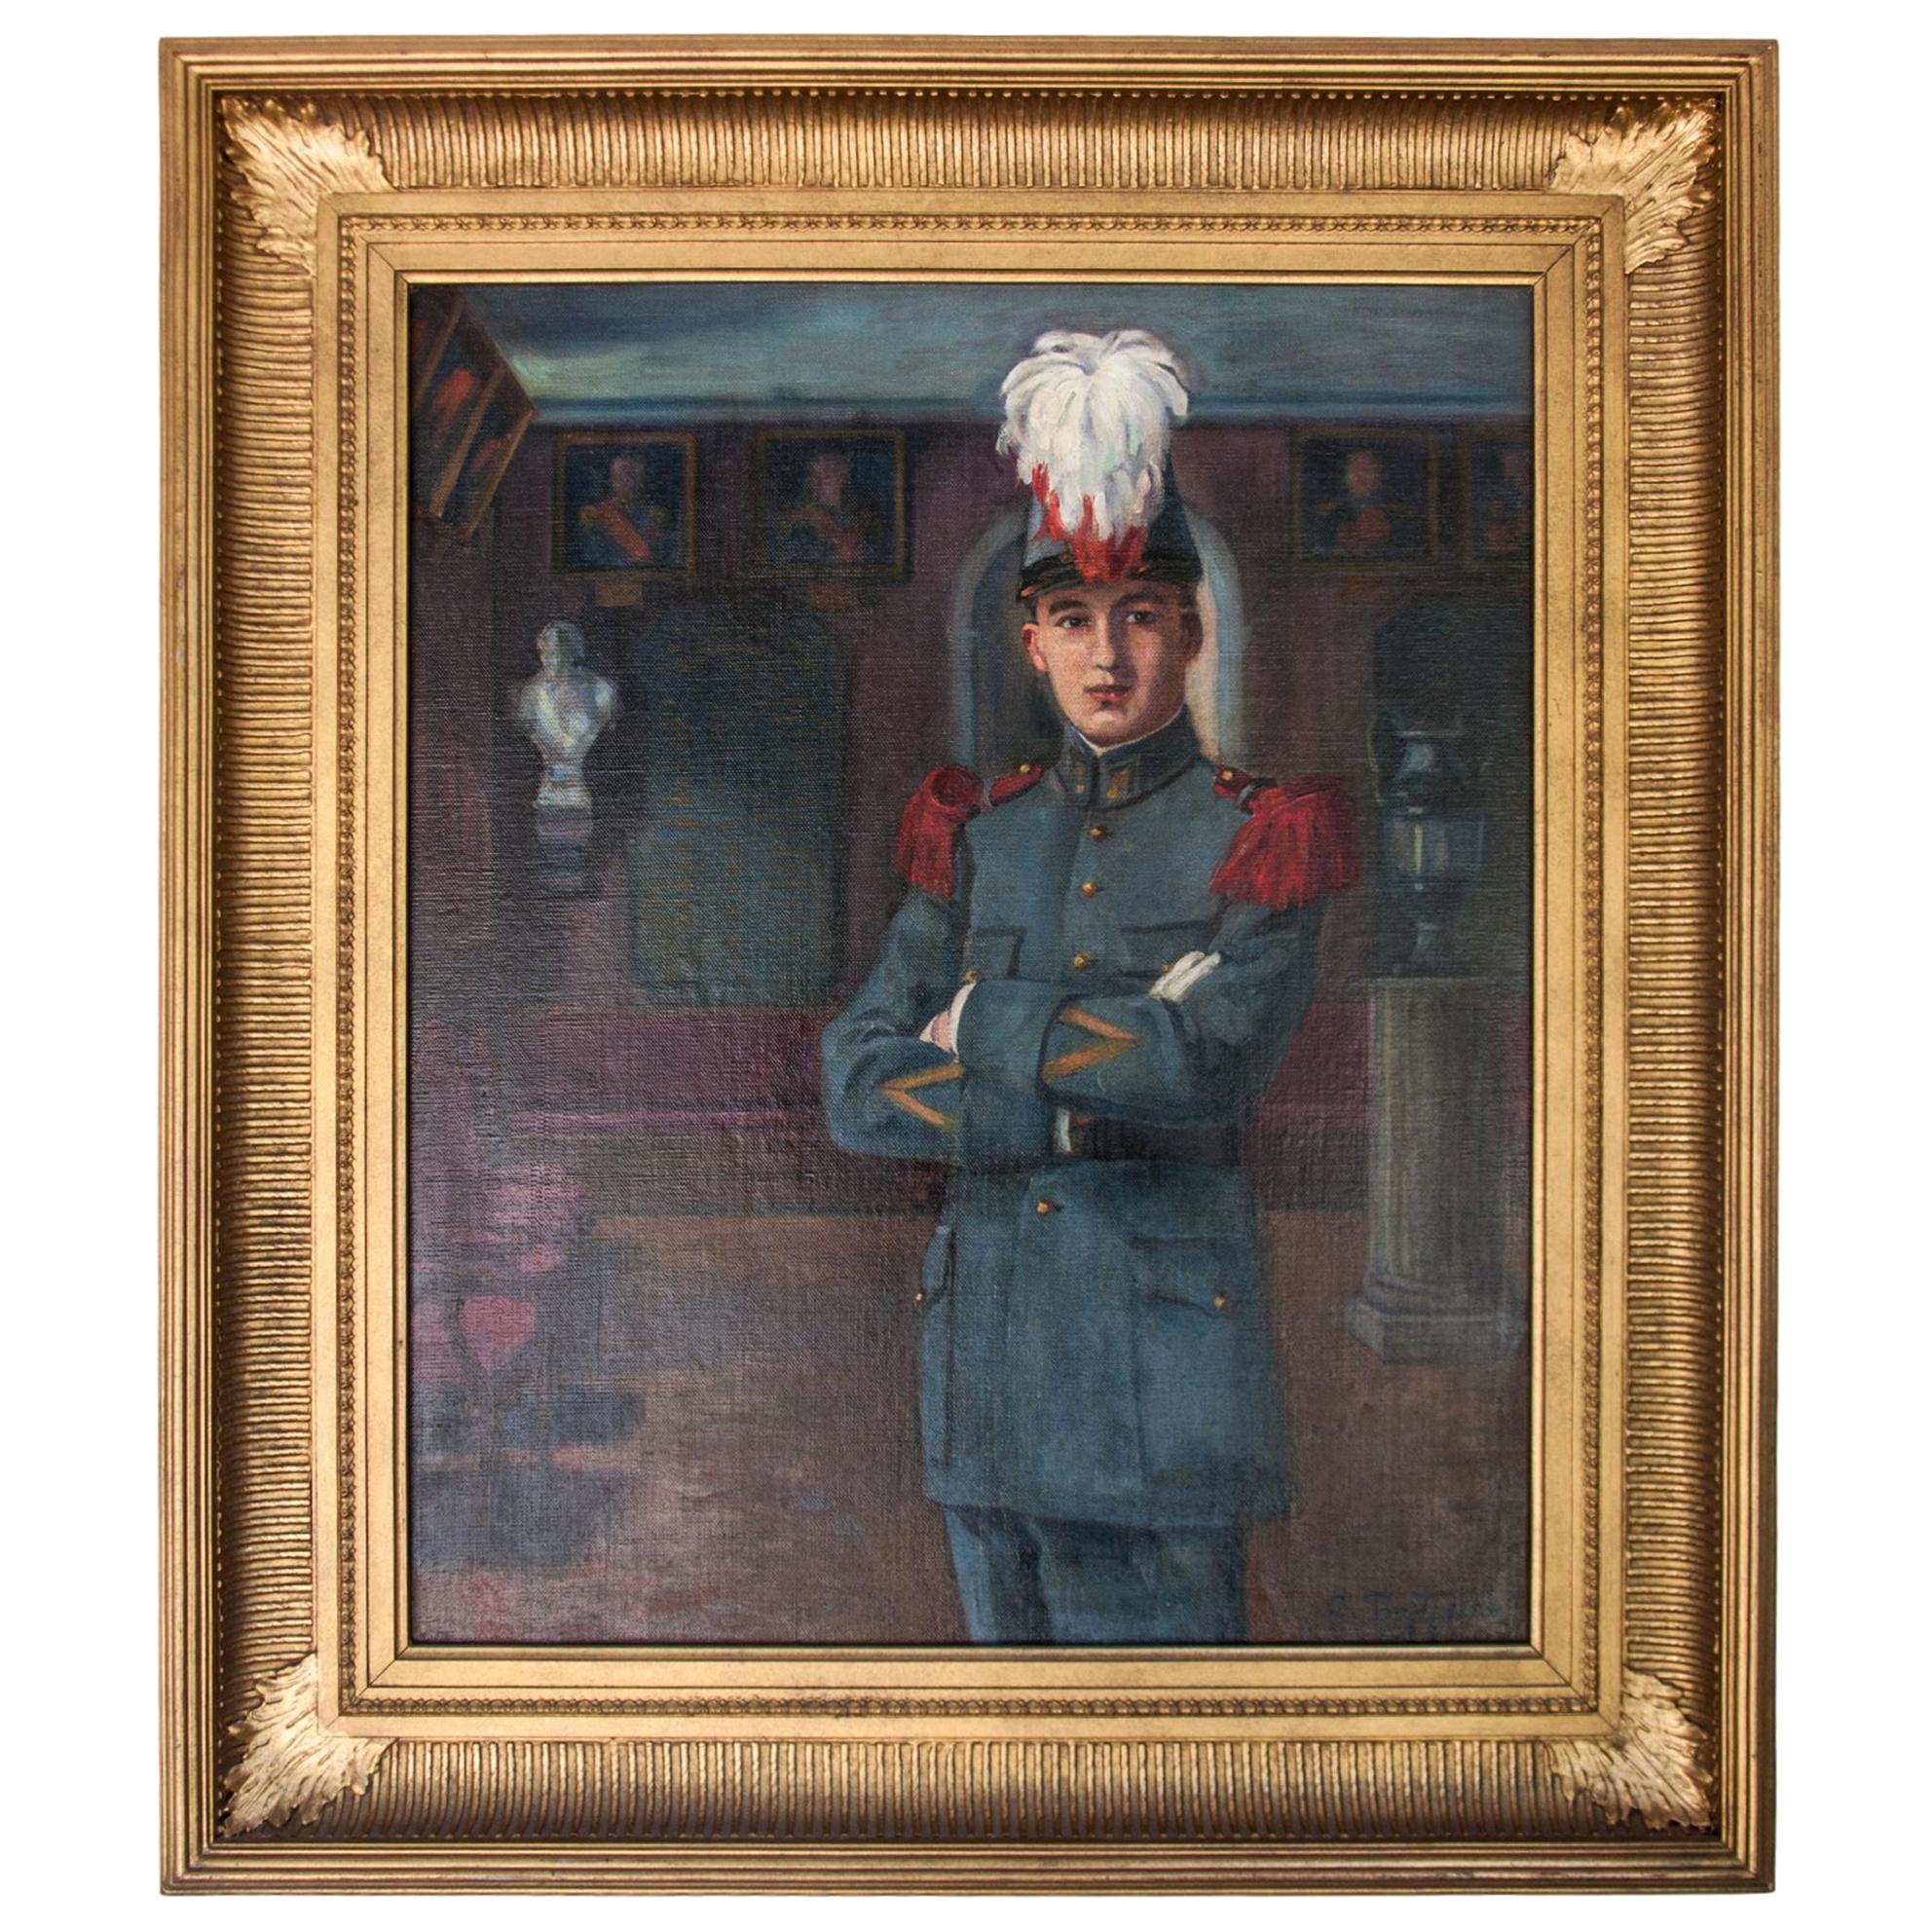 Early 20th Century Oil on Canvas by C Tertiaux, "Boy From Academy", circa 1922 For Sale